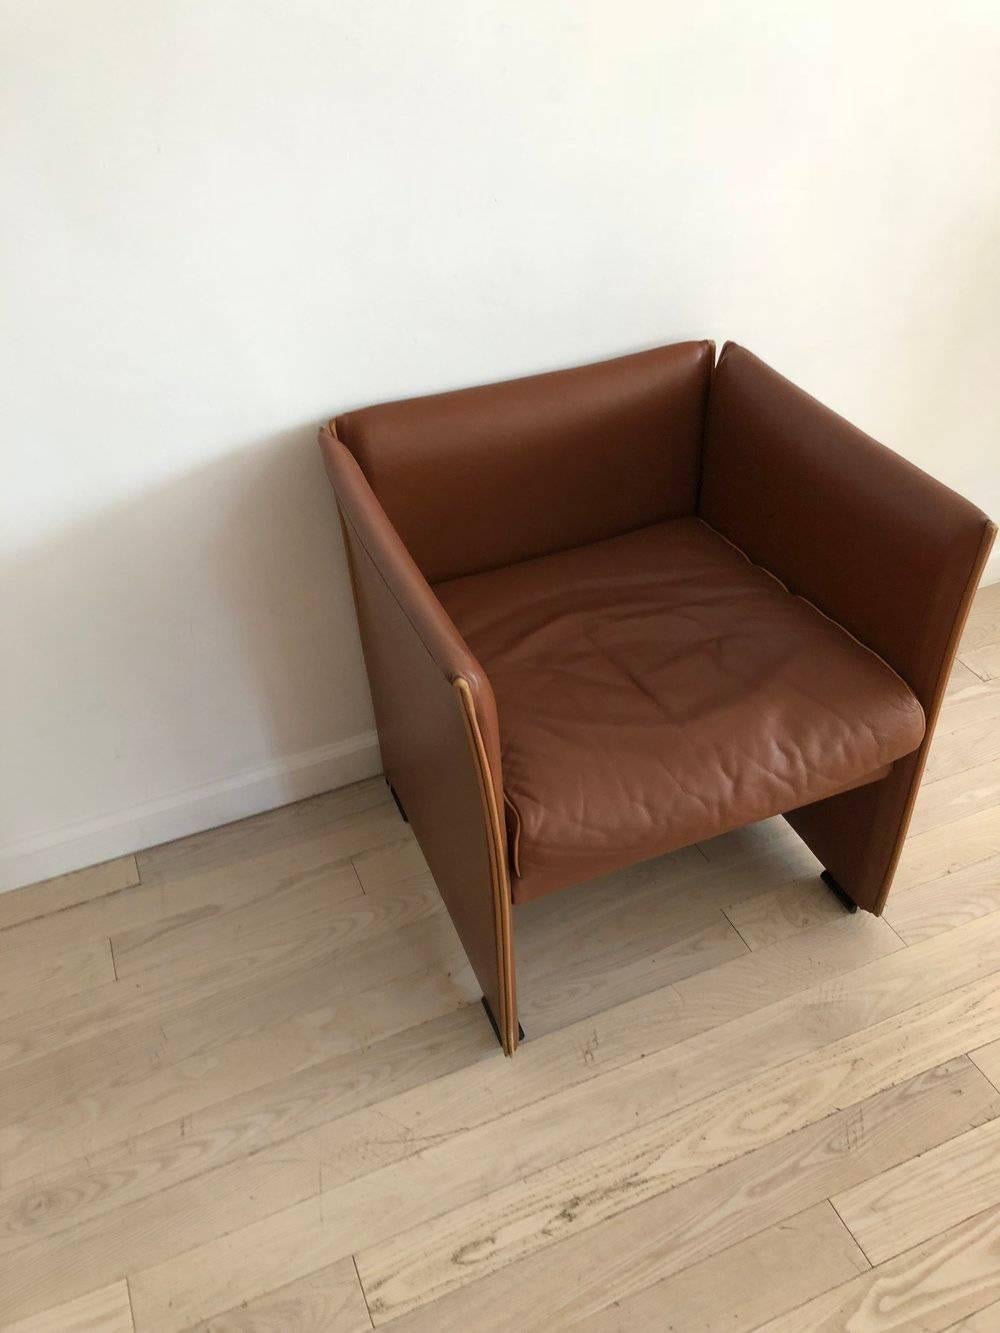 1976 401 Break Chair by Mario Bellini for Cassina, Brown Leather 5